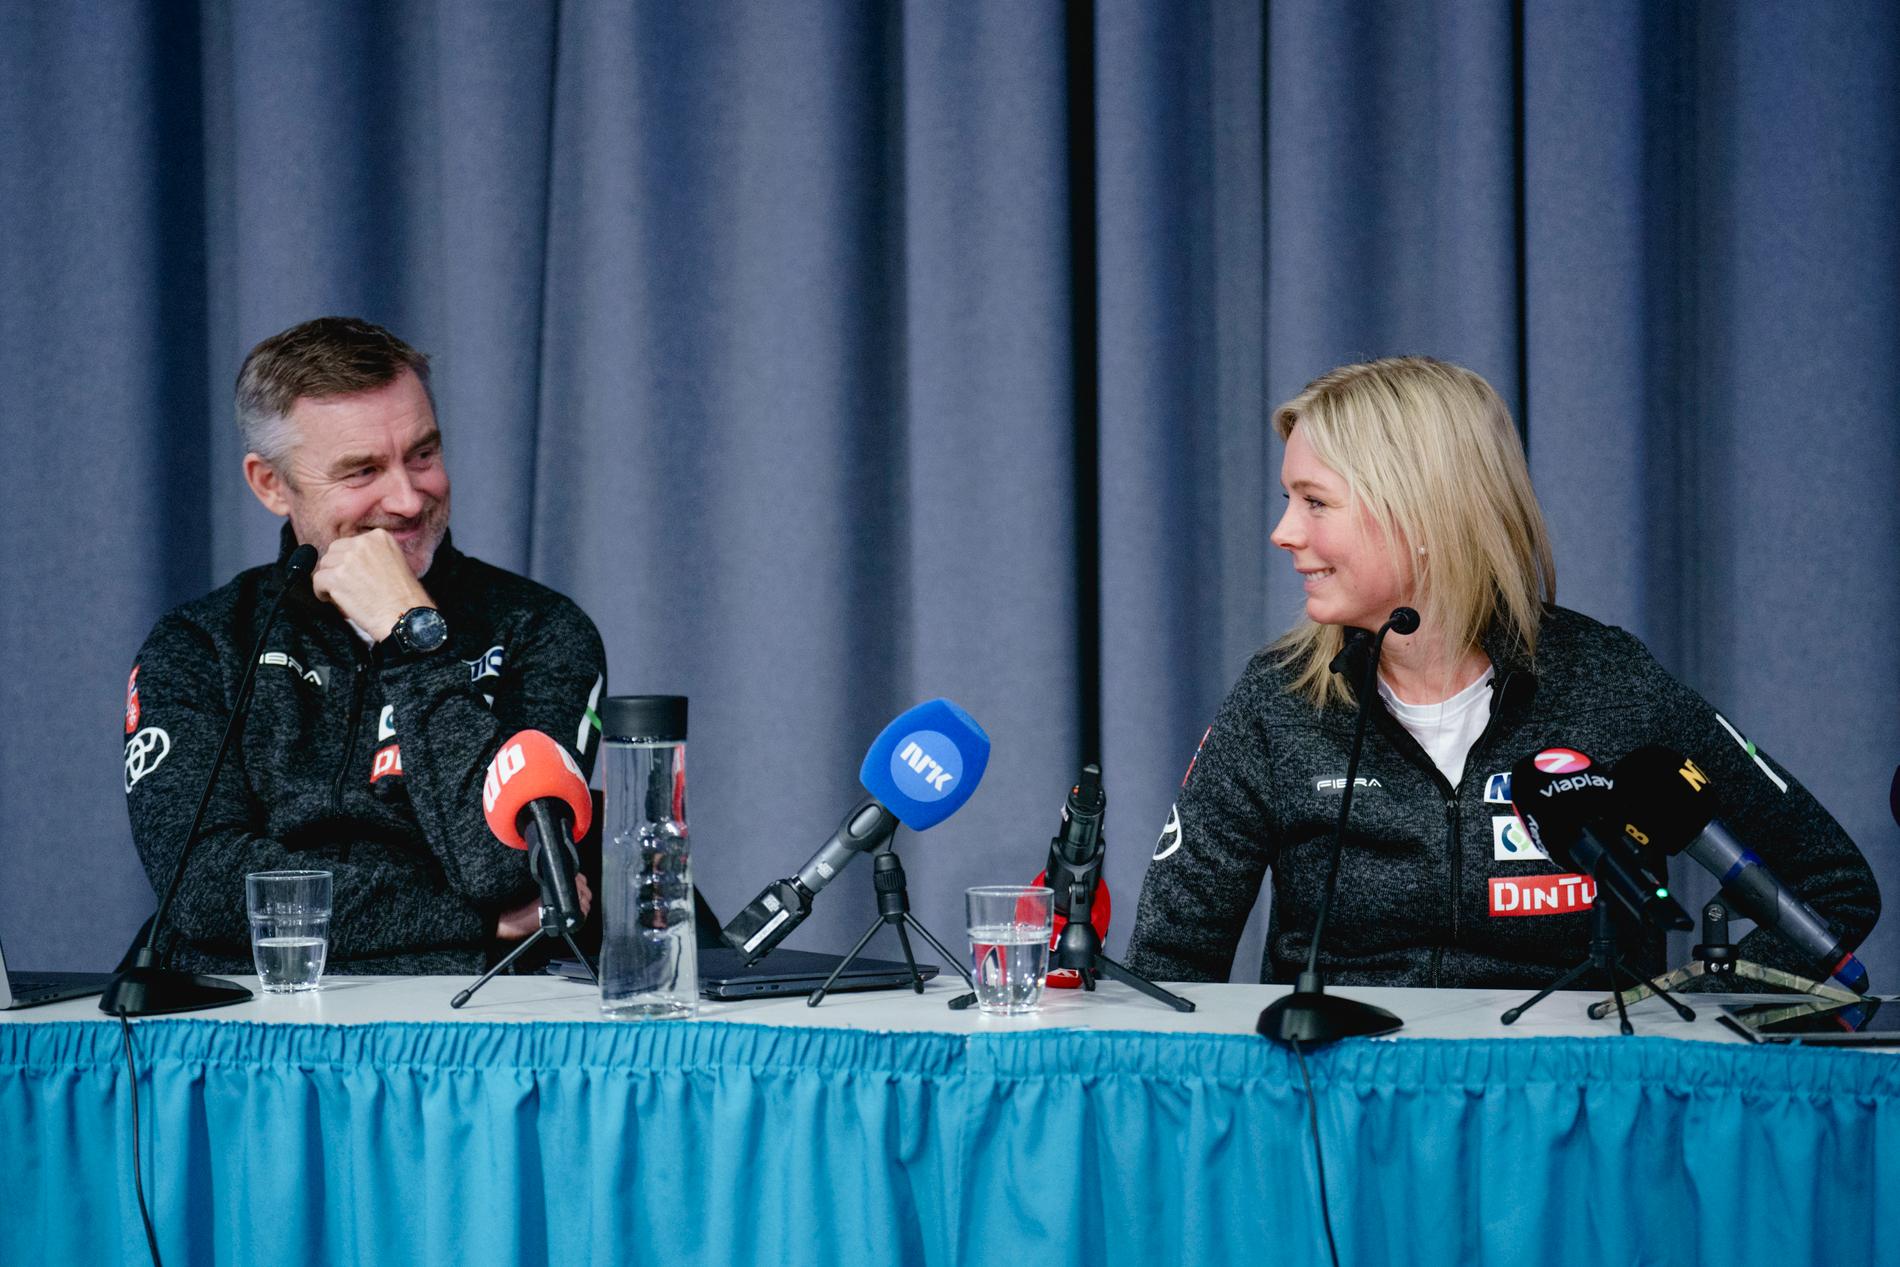 Good call: Klas Brede Braathen and Maren Lundby during the press conference in December.  Lundby announced that she had resigned.